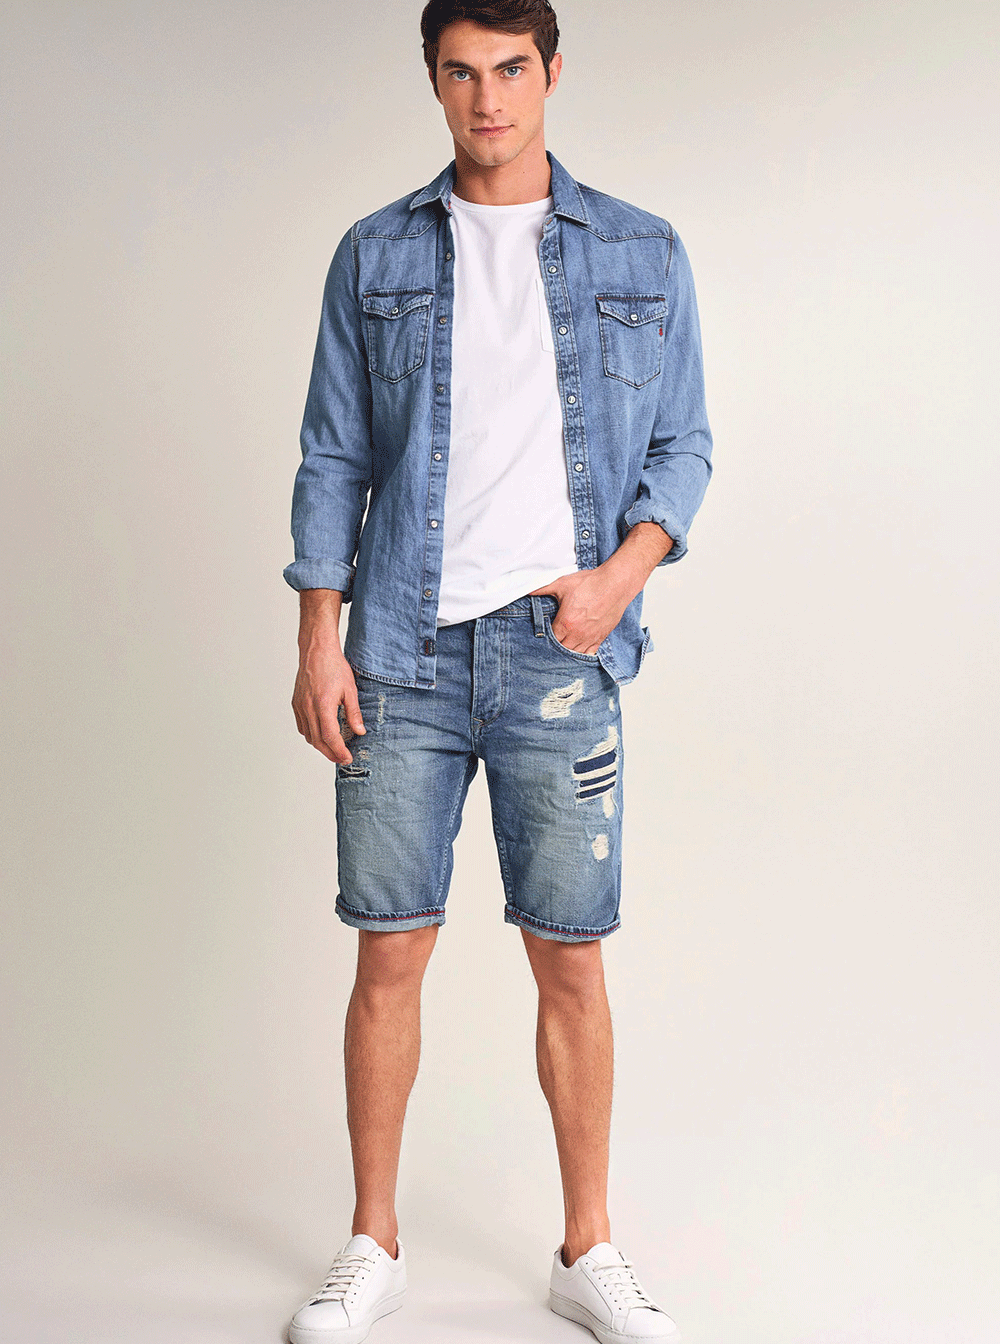 Blue Denim Shirt with Shorts Outfits For Men (32 ideas & outfits) |  Lookastic